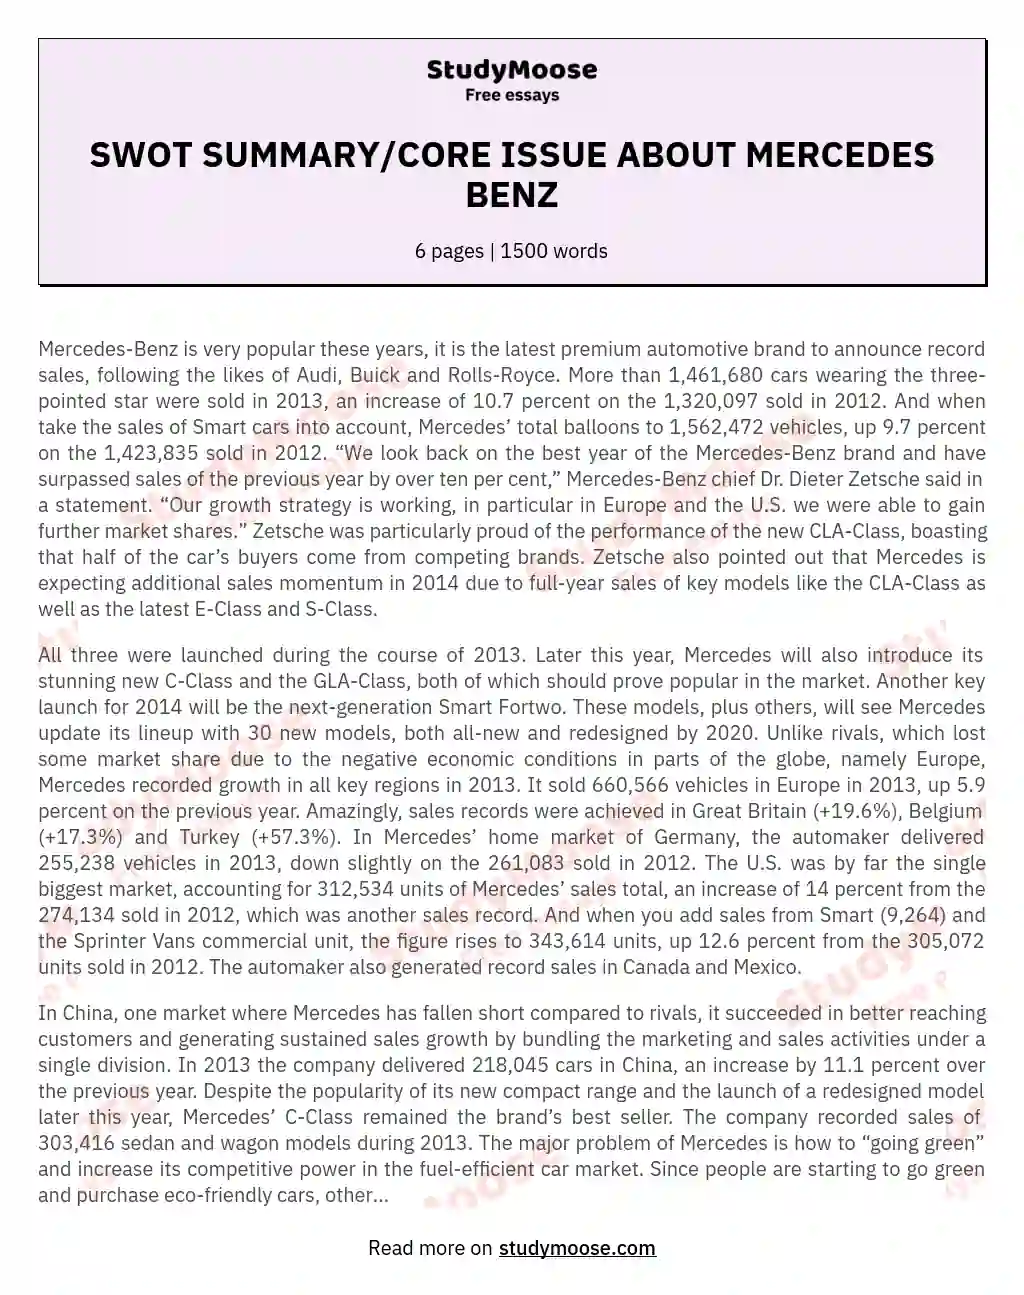 SWOT SUMMARY/CORE ISSUE ABOUT MERCEDES BENZ essay